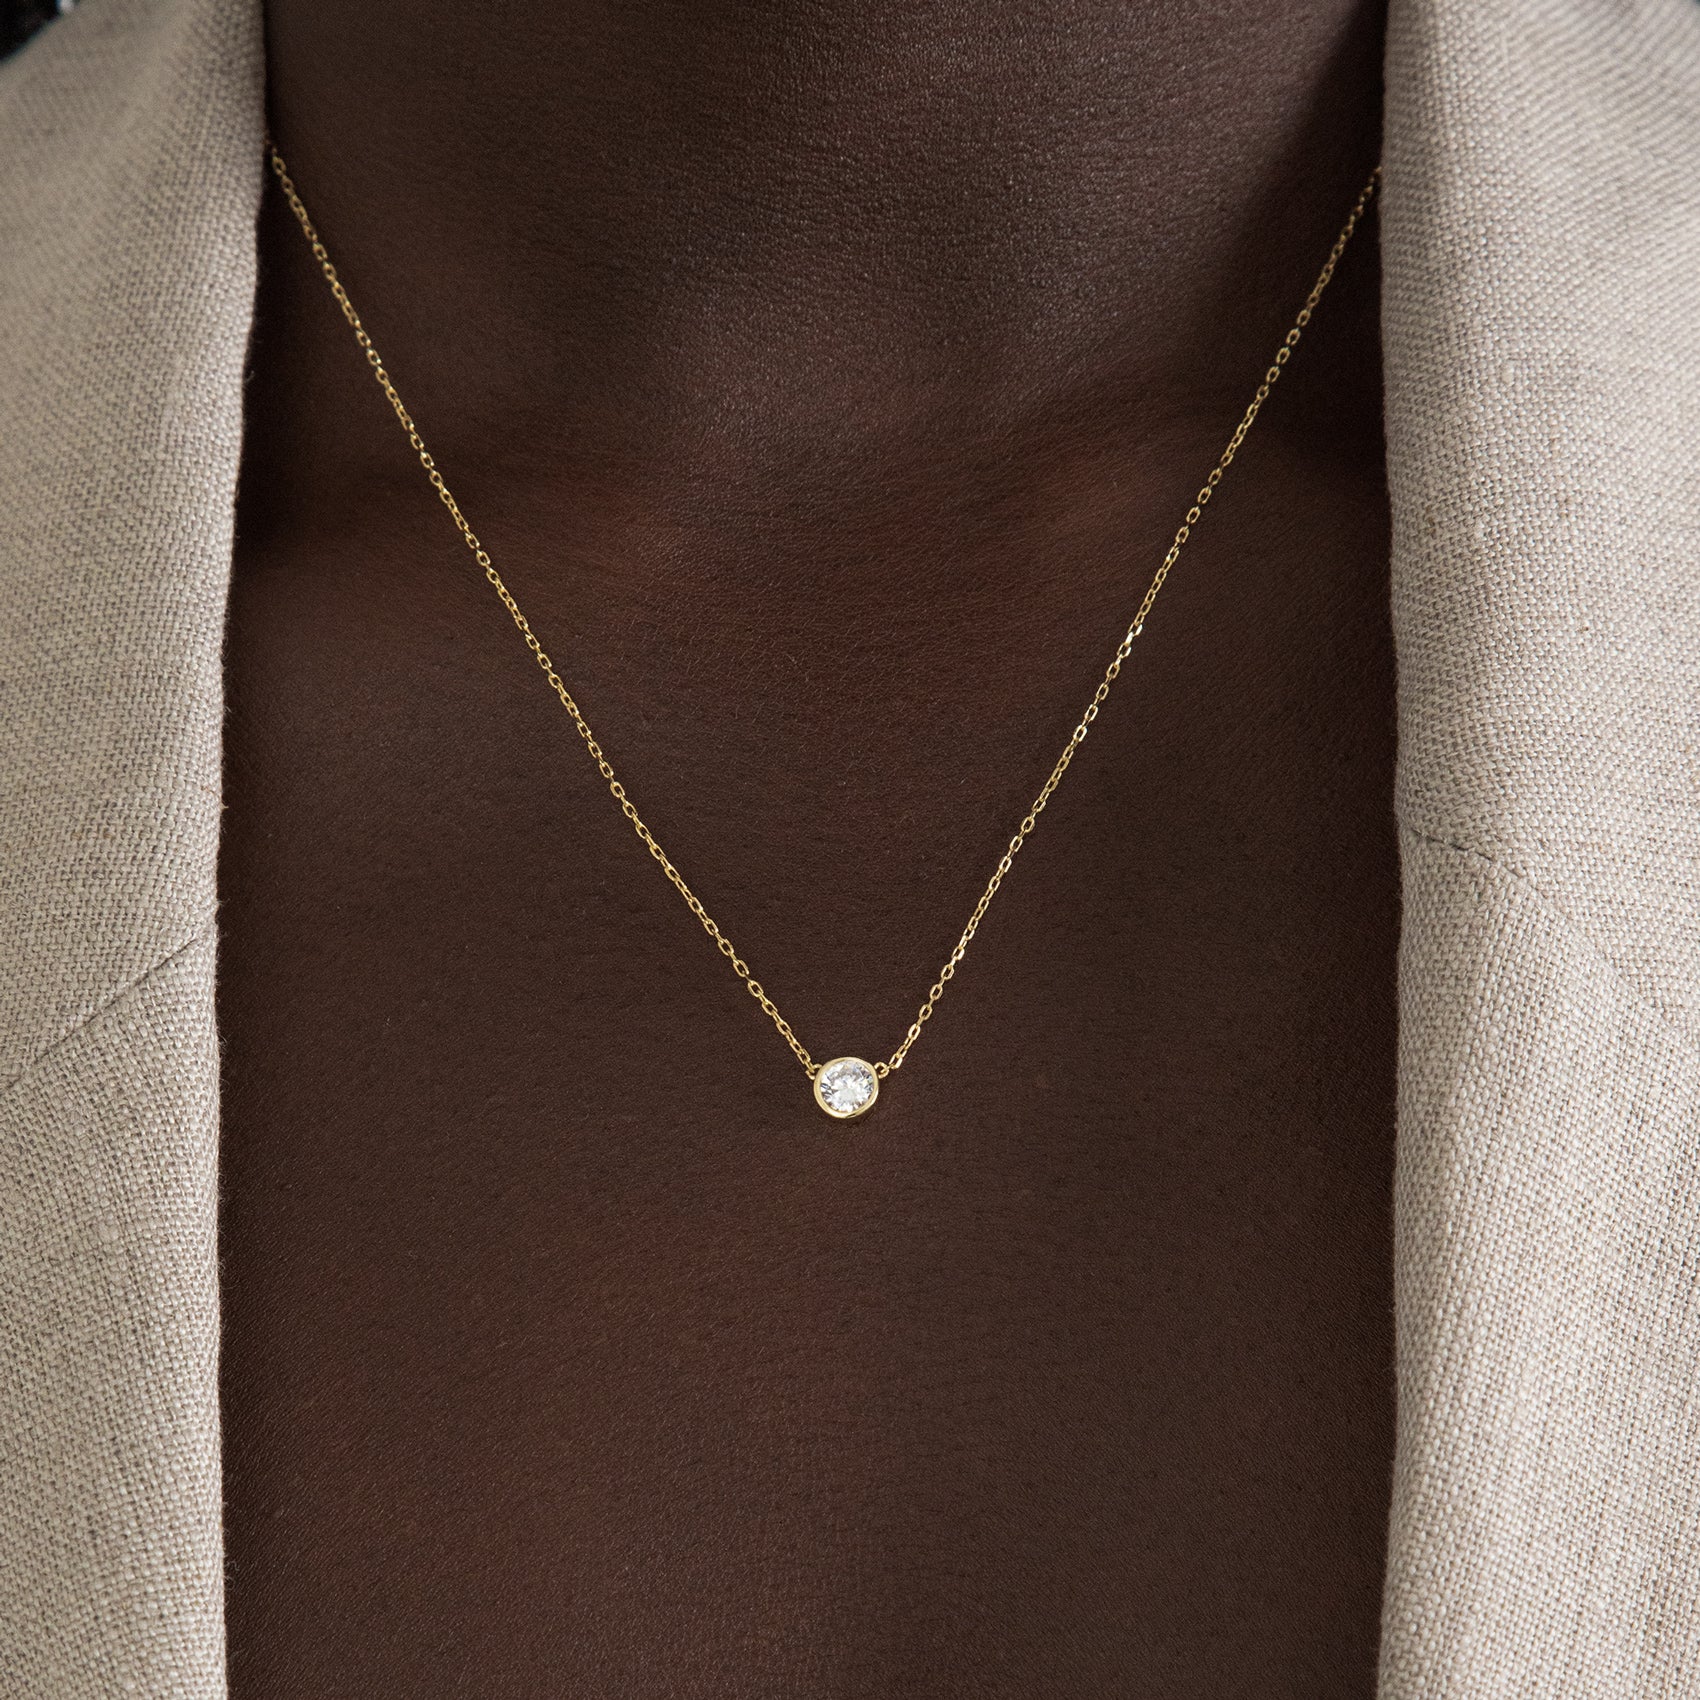 Solitaire Necklace, by SHASHI Vermeil